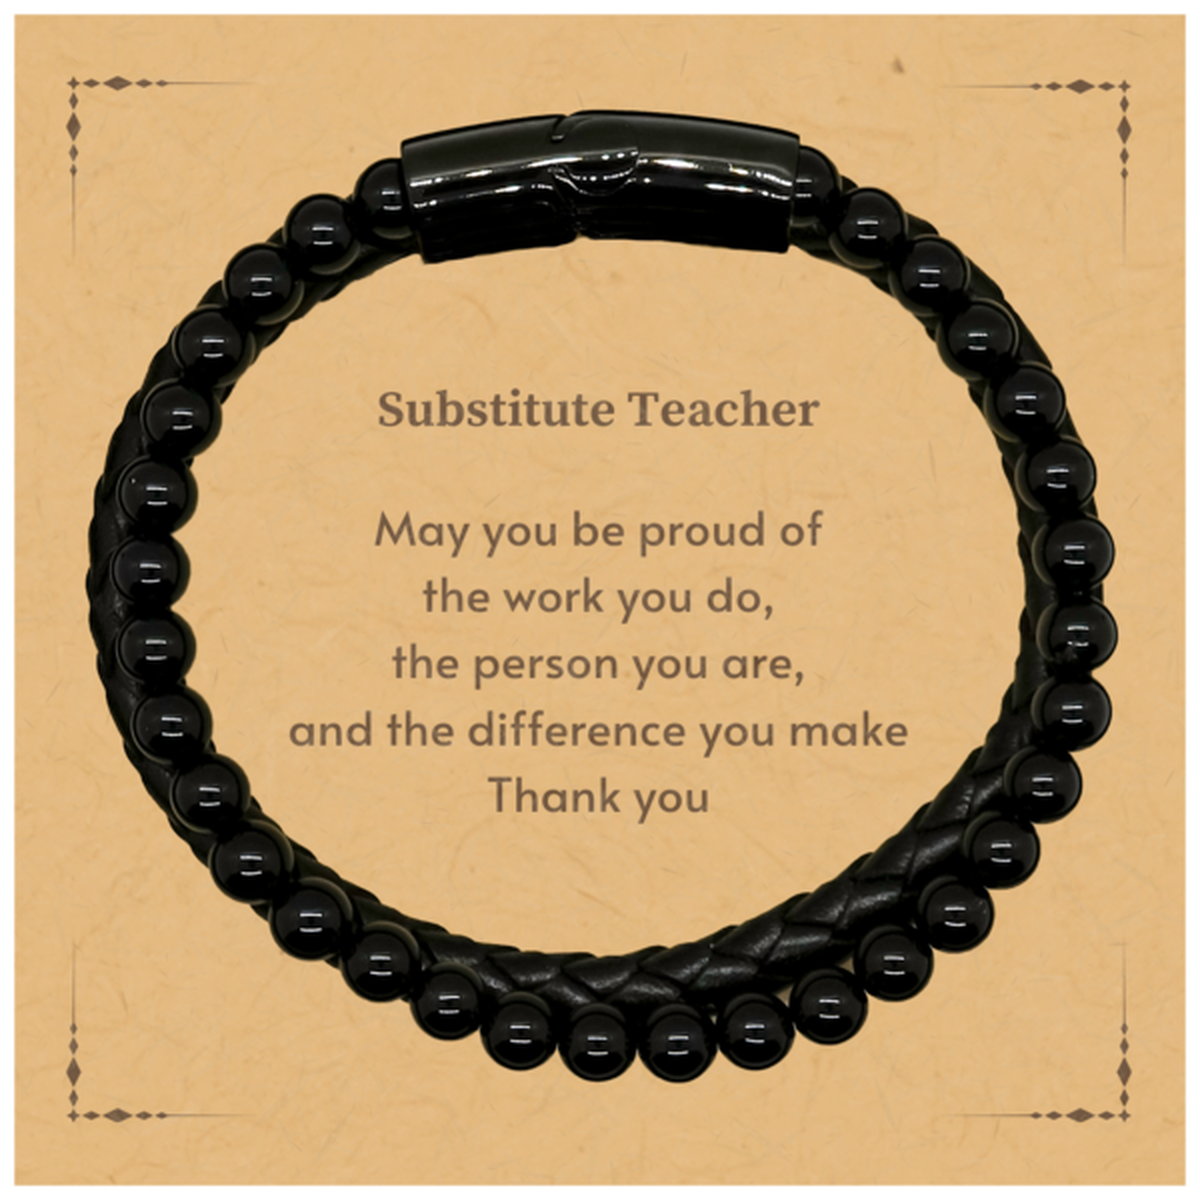 Heartwarming Stone Leather Bracelets Retirement Coworkers Gifts for Substitute Teacher, Substitute Teacher May You be proud of the work you do, the person you are Gifts for Boss Men Women Friends